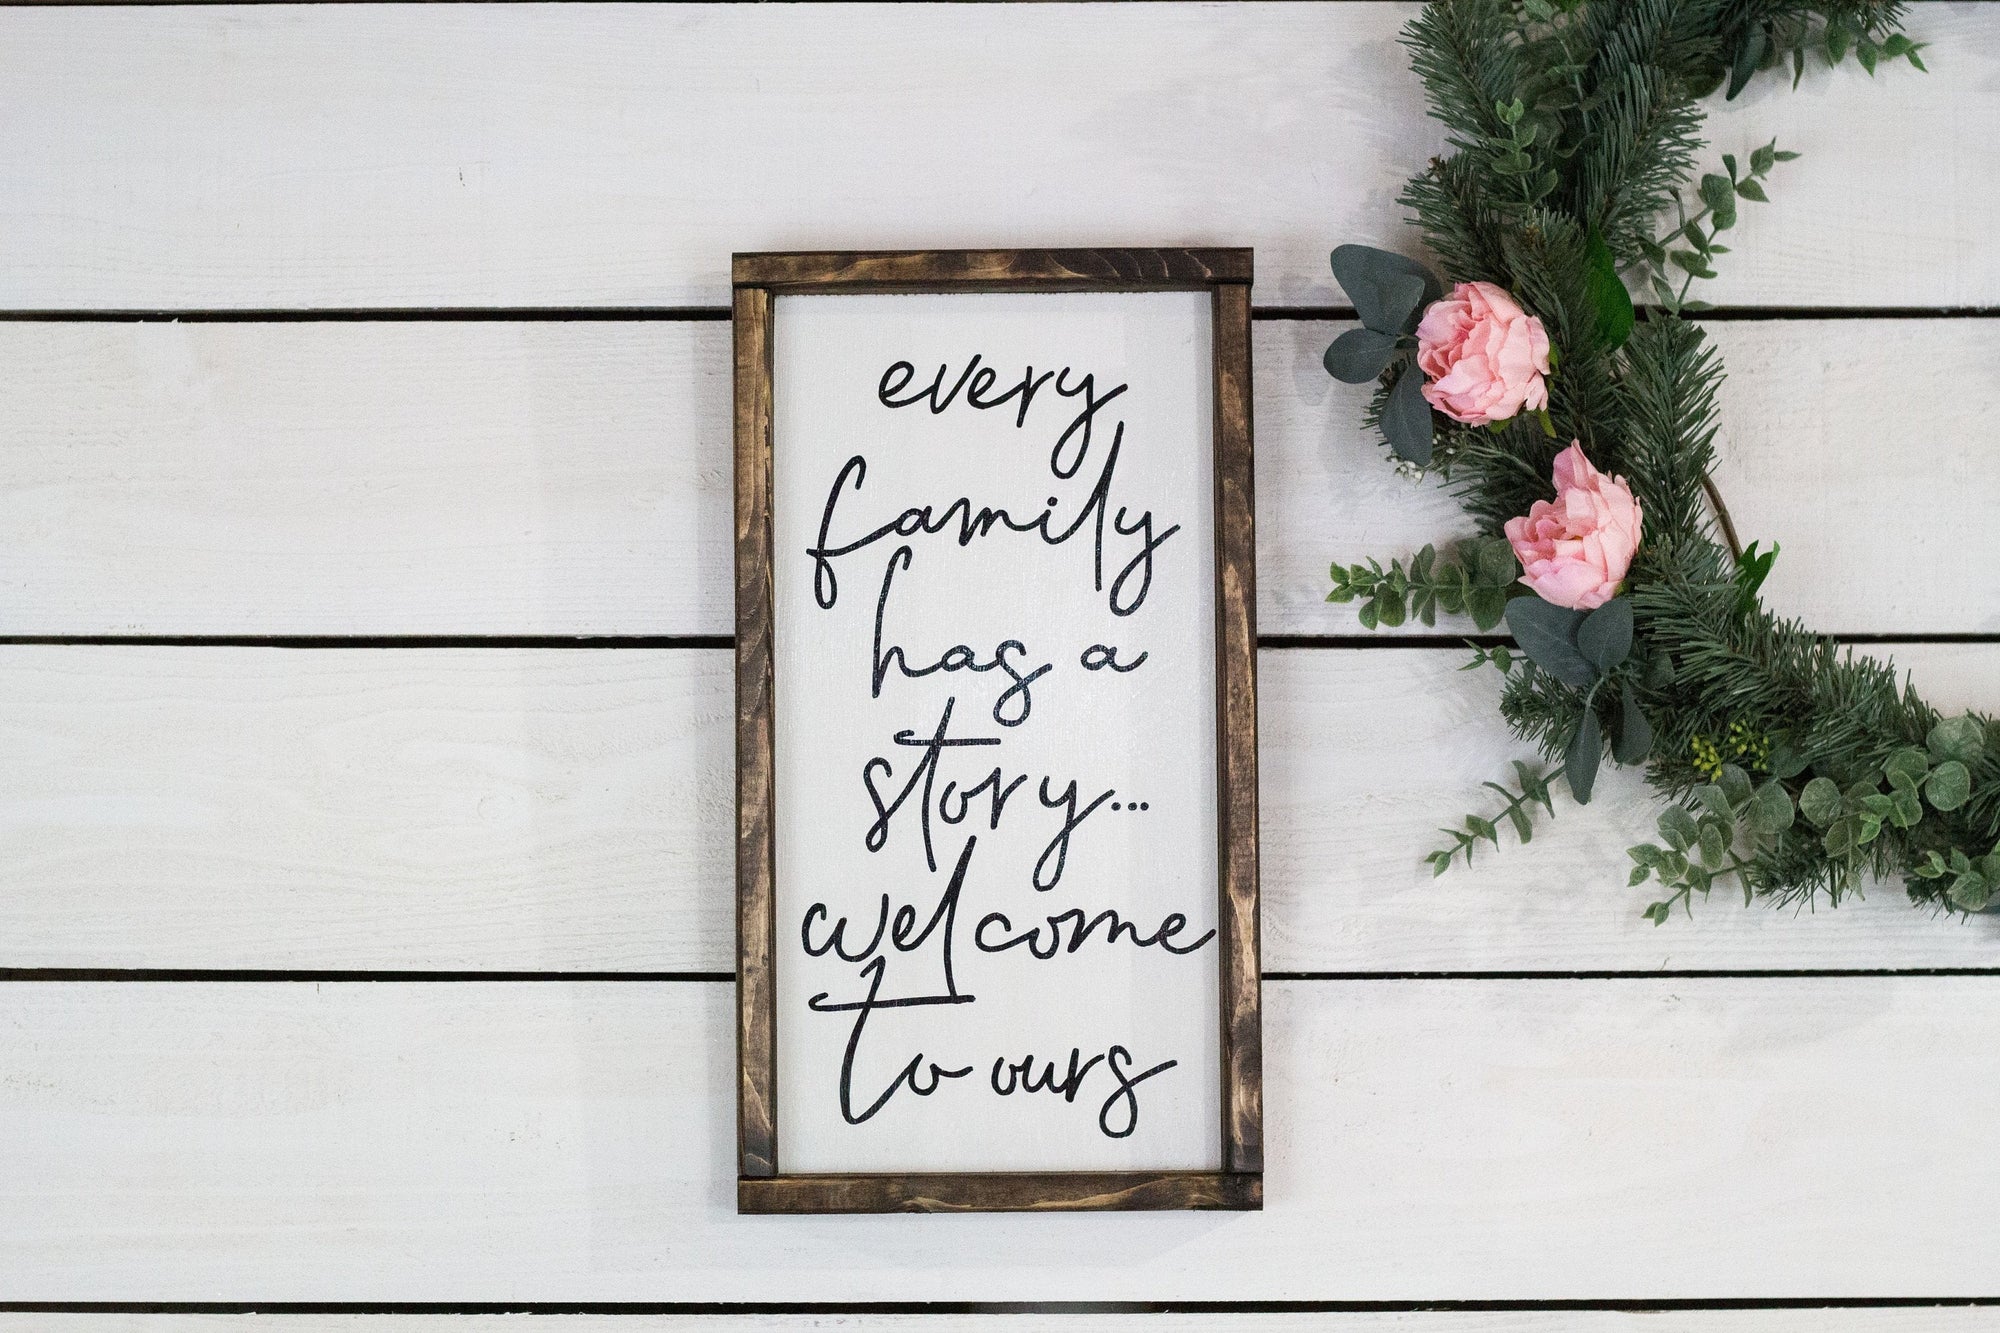 every family has a story welcome to ours